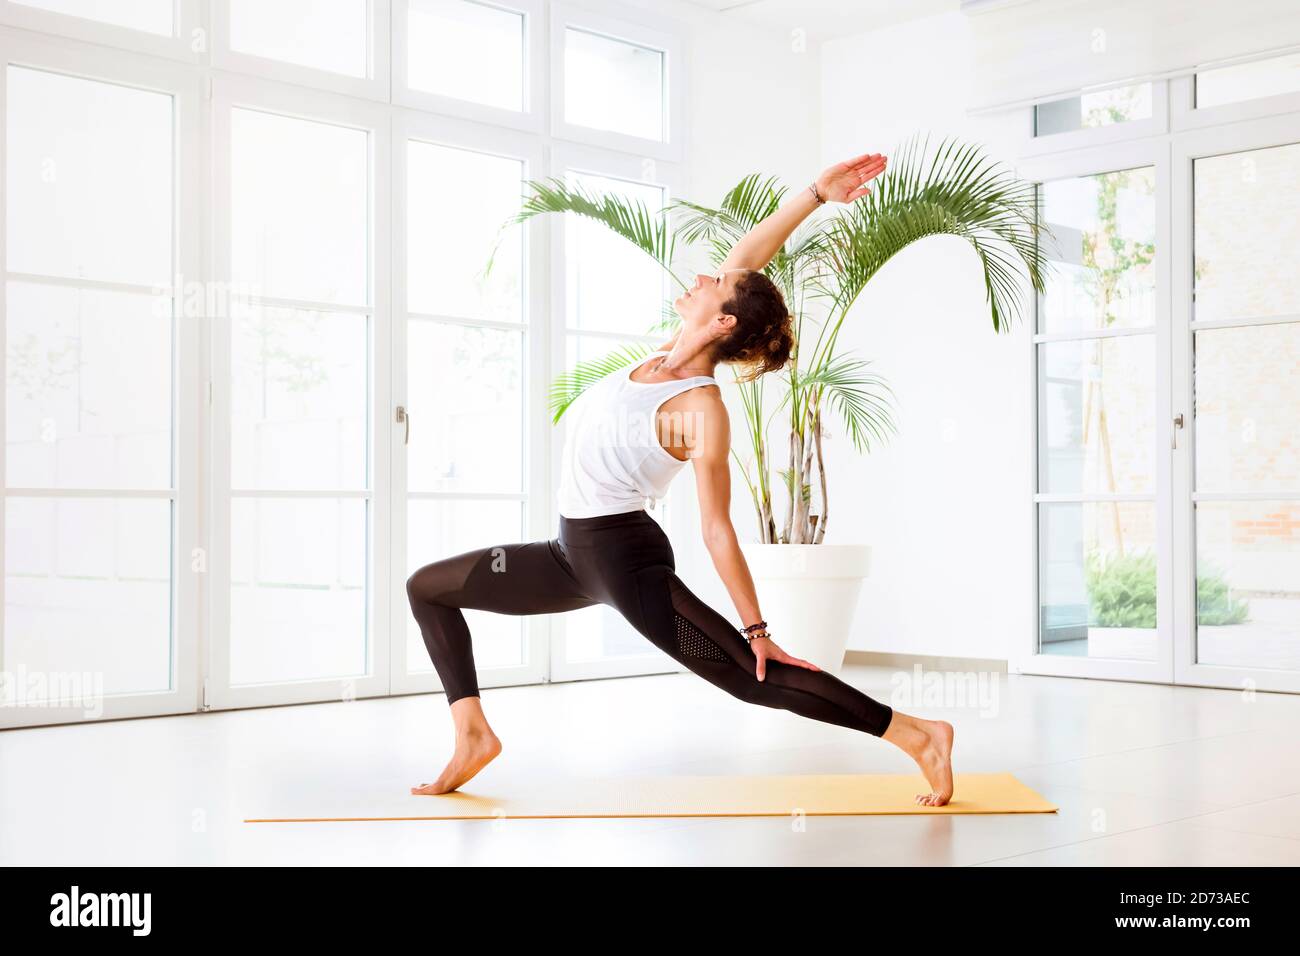 Young woman doing an Ashta Chandrasana yoga pose or high crescent lunge in a high key gym with copyspace in side view Stock Photo